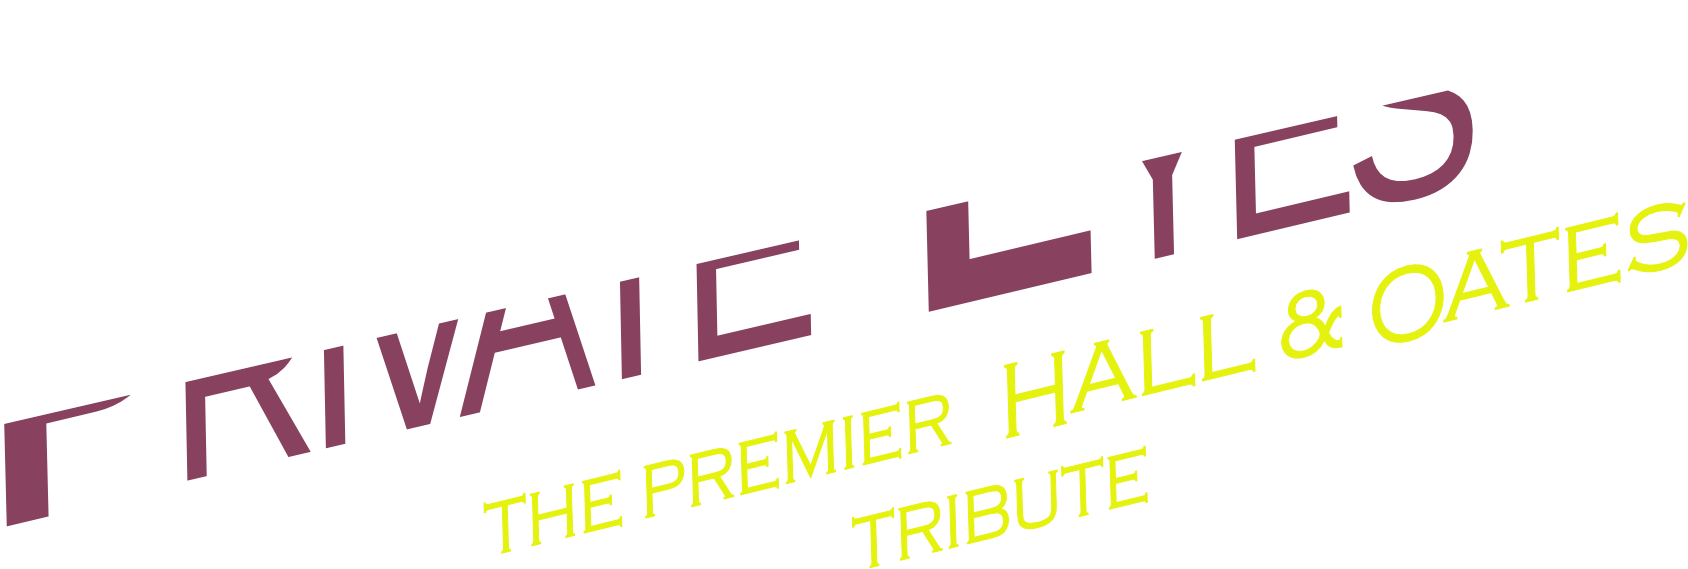 Private Eyes, a tribute to Daryl Hall & John Oates